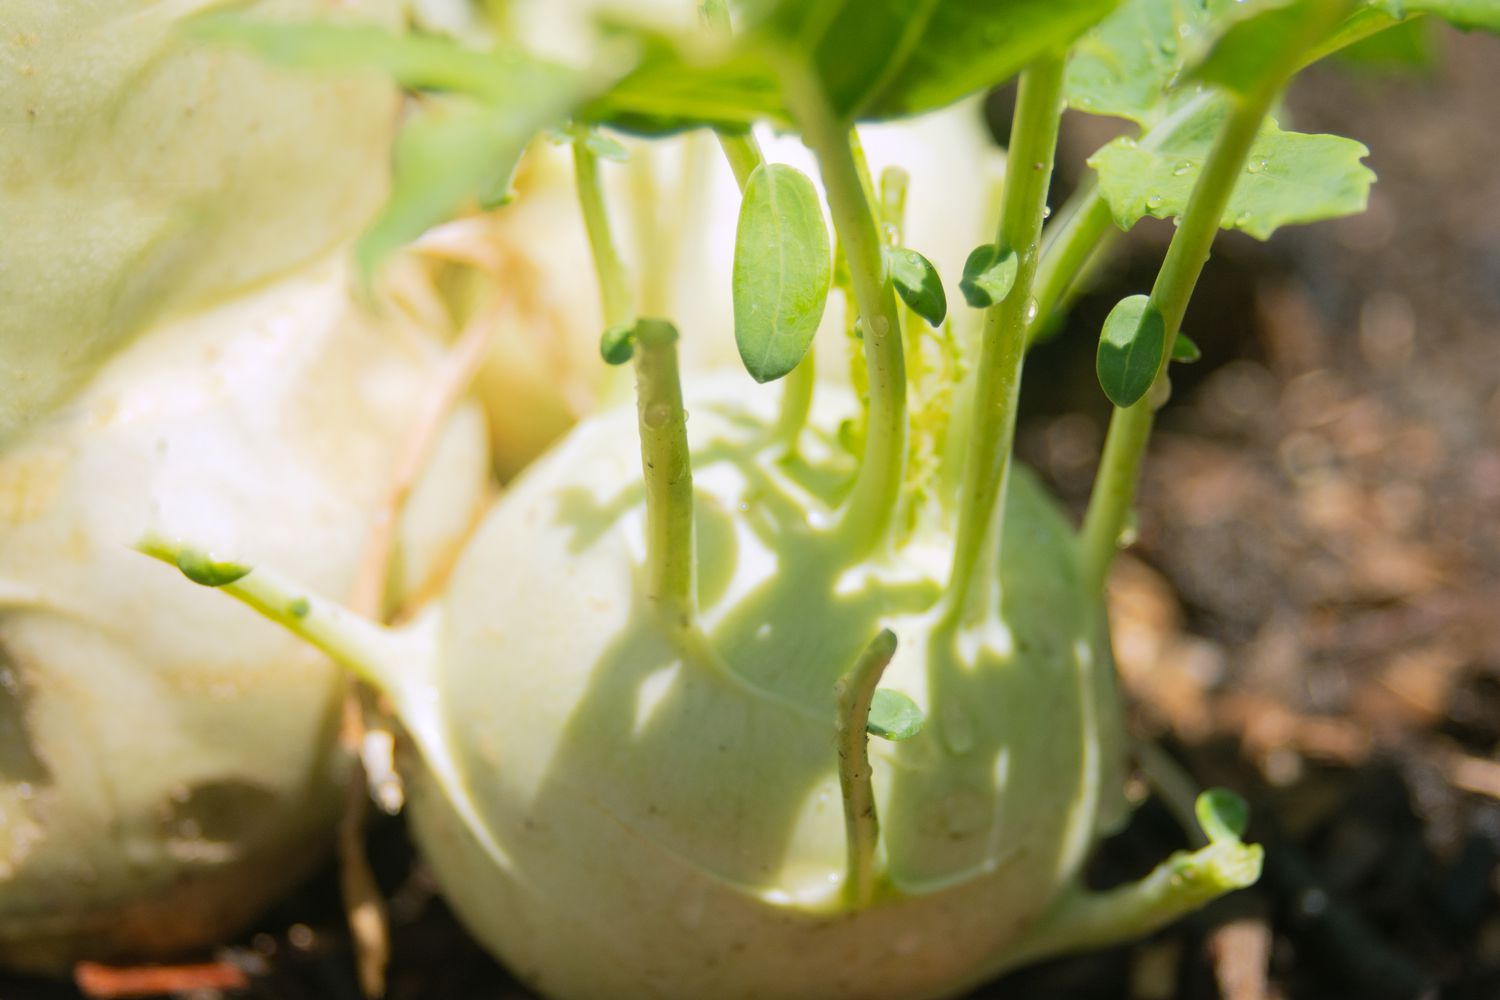 Kohlrabi plant with round vegetable and stems growing on top in partial sunlight